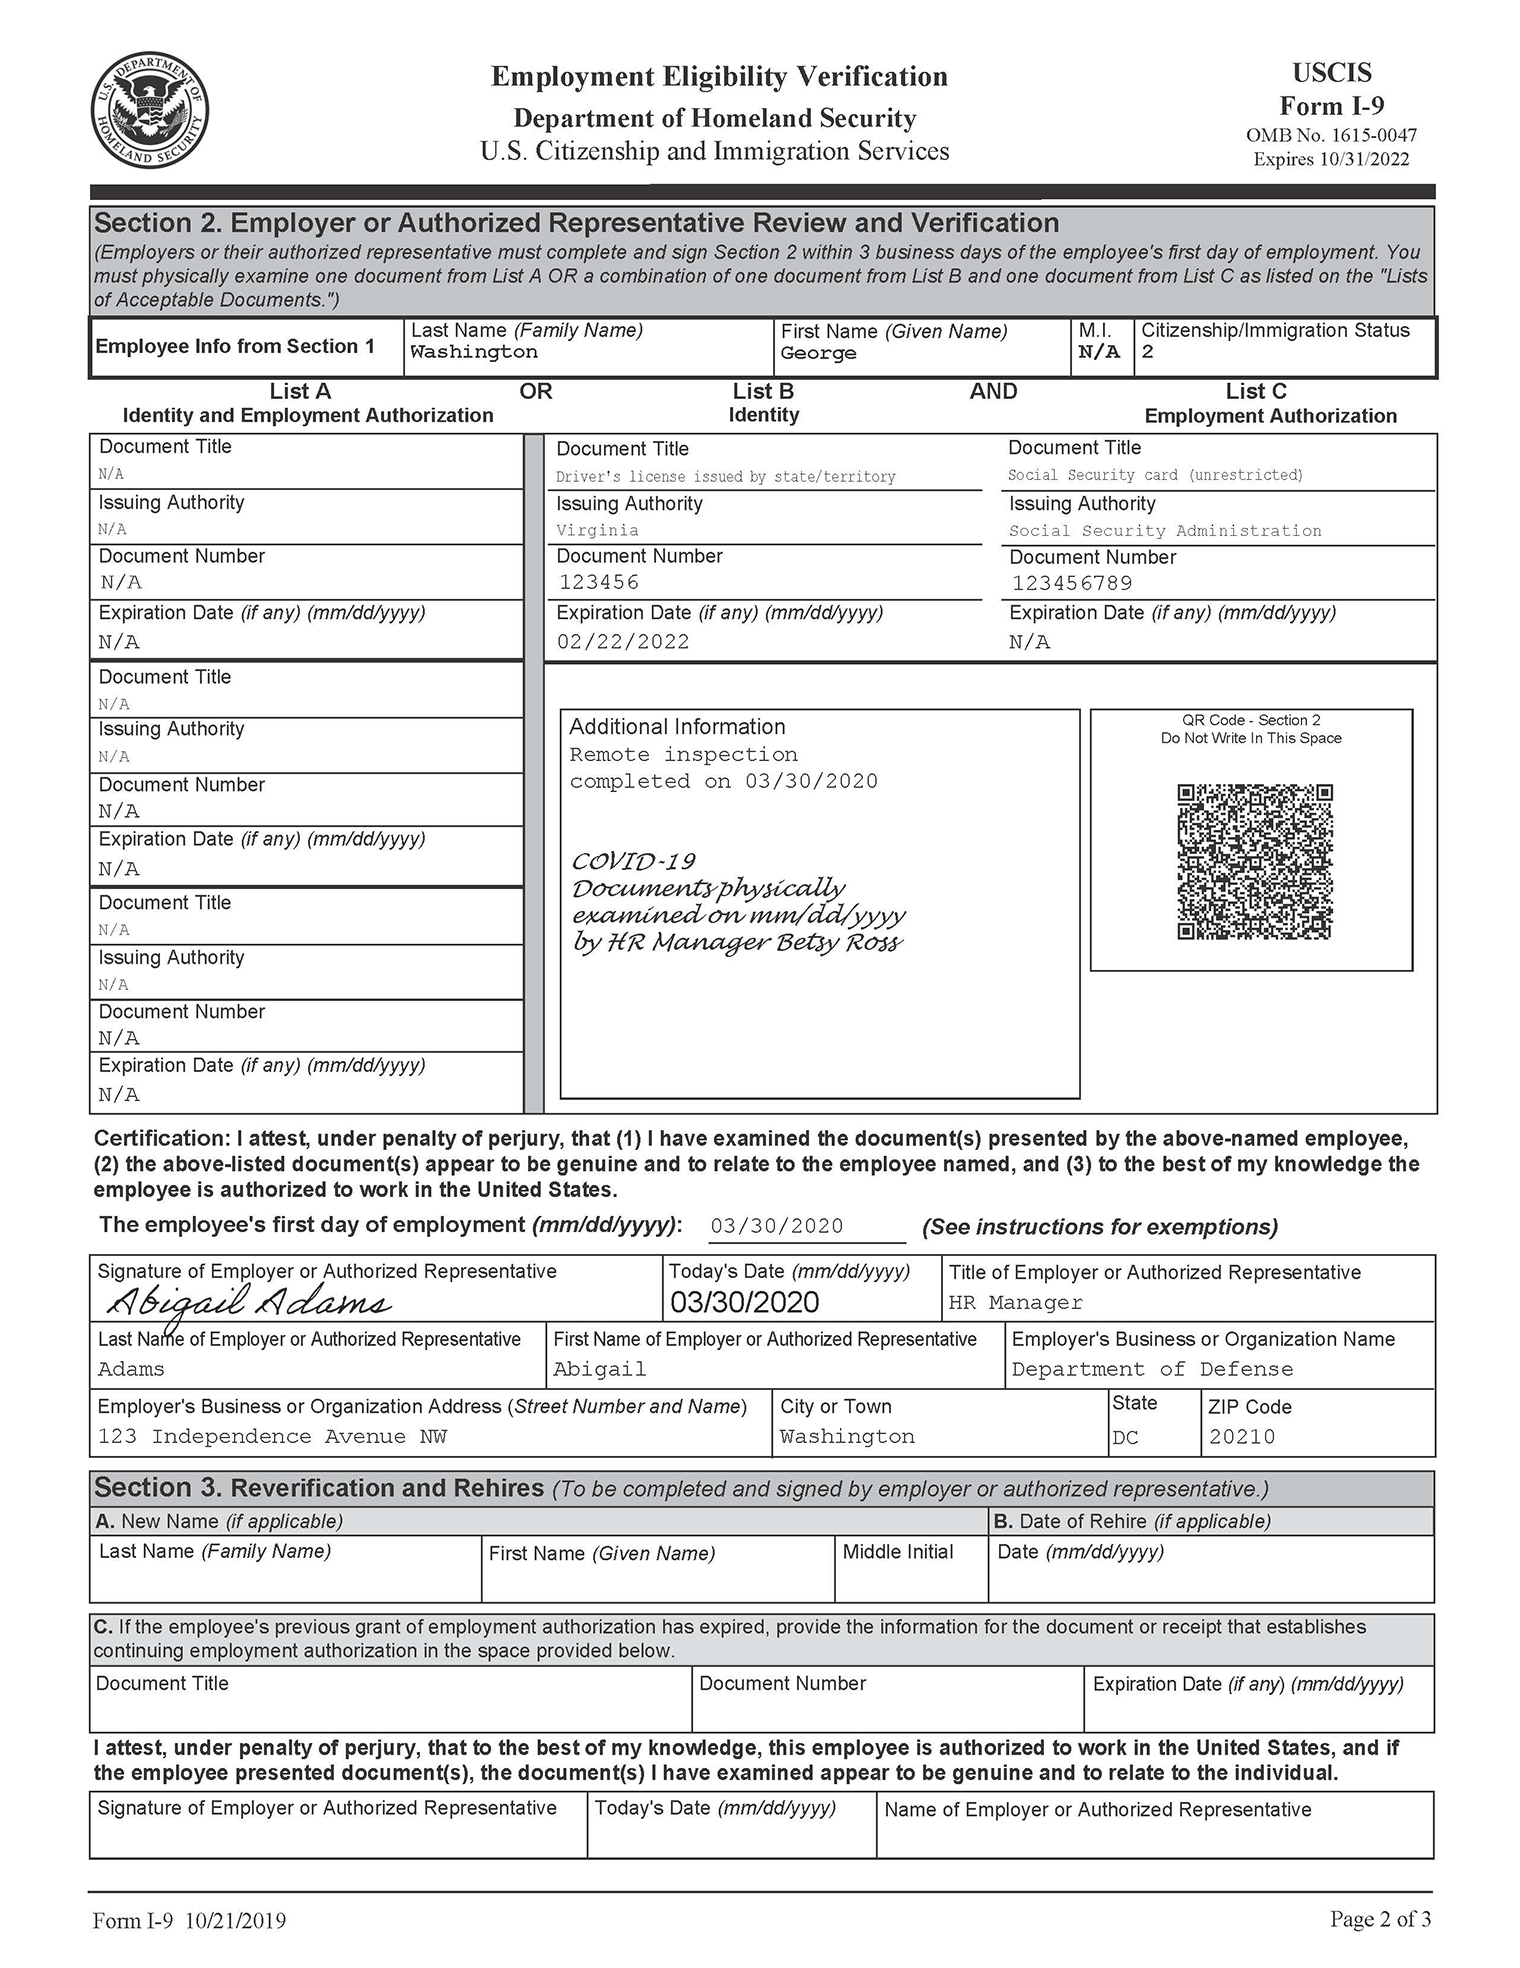 Form I-9 Examples Related To Temporary Covid-19 Policies | Uscis regarding I-9 Form Requirements